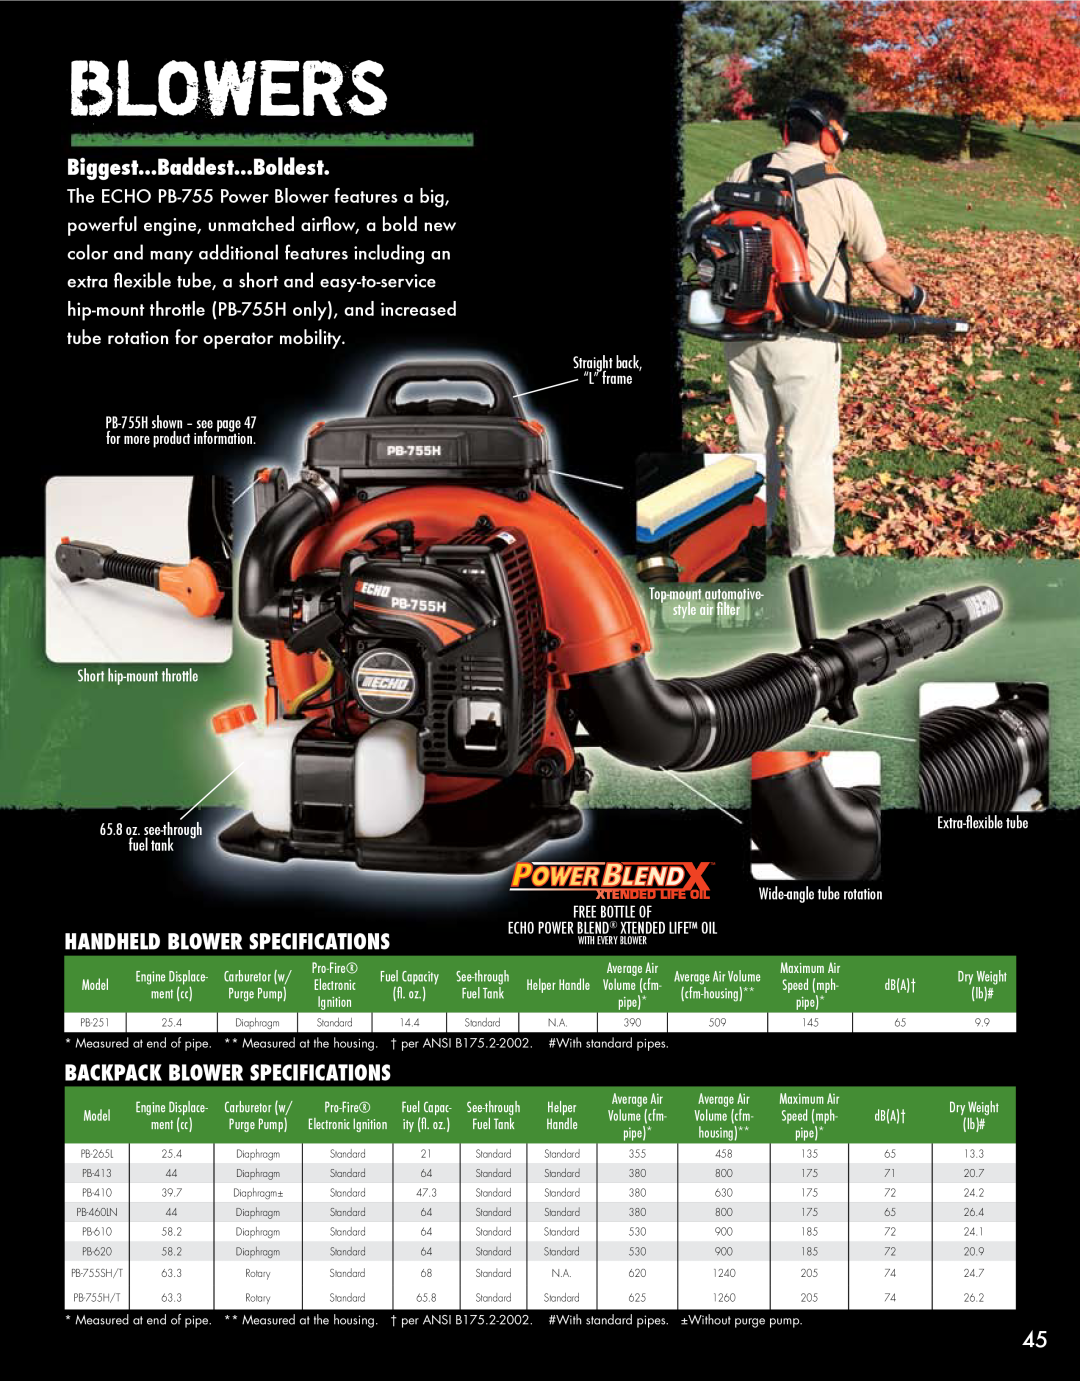 Echo PB-755 manual Blowers, Biggest...Baddest...Boldest, Backpack Blower Specifications, Handheld Blower Specifications 